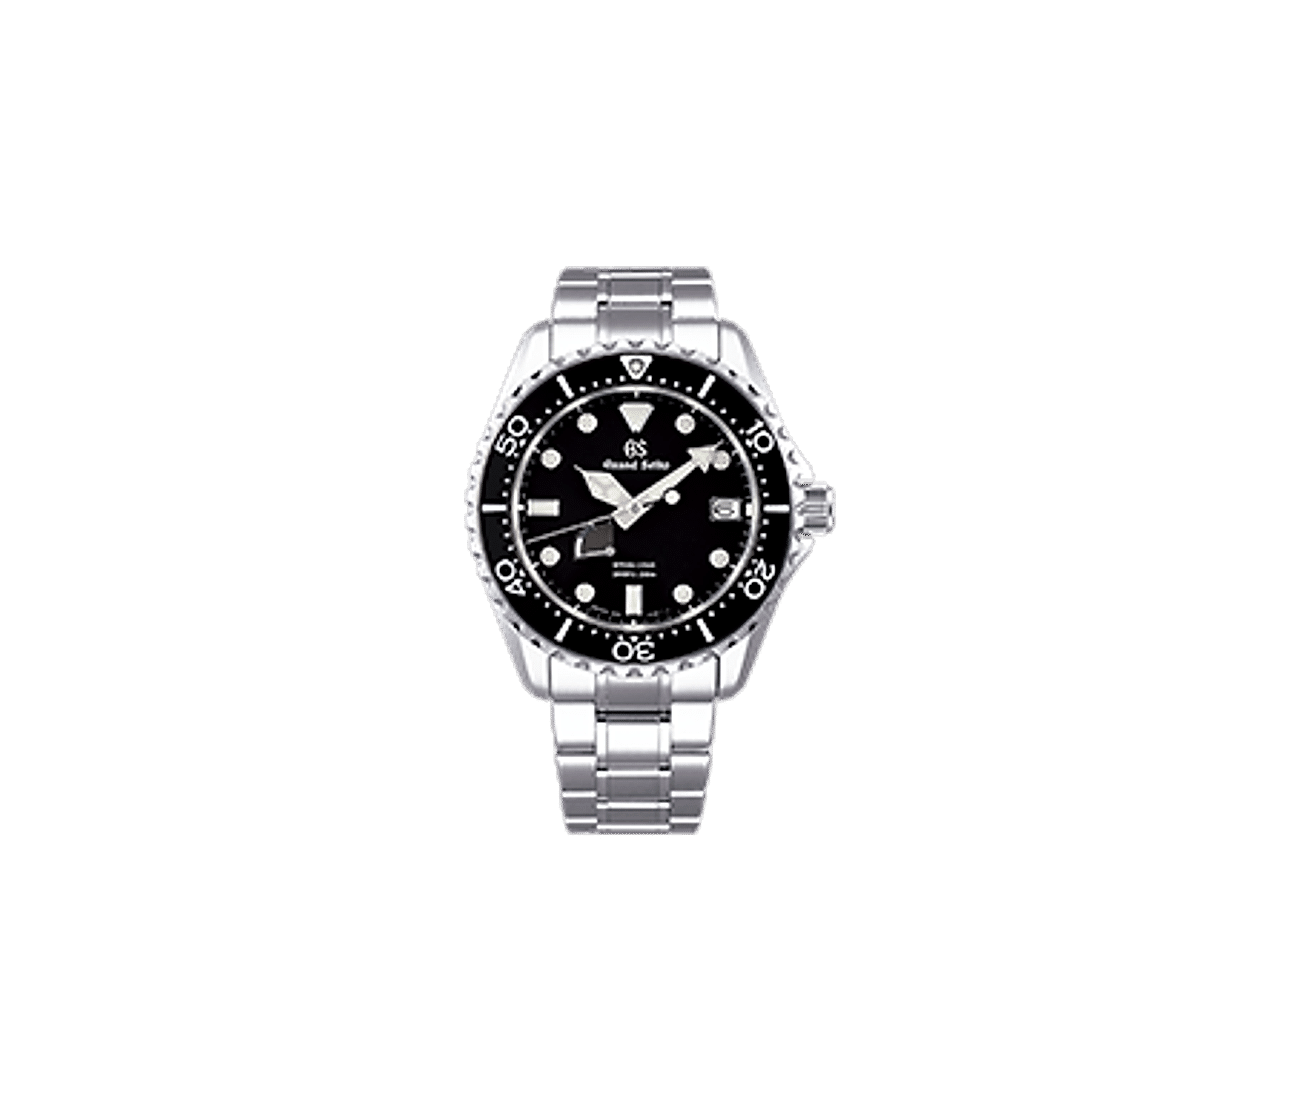 Spring Drive Diver's Watch in Stainless Steel